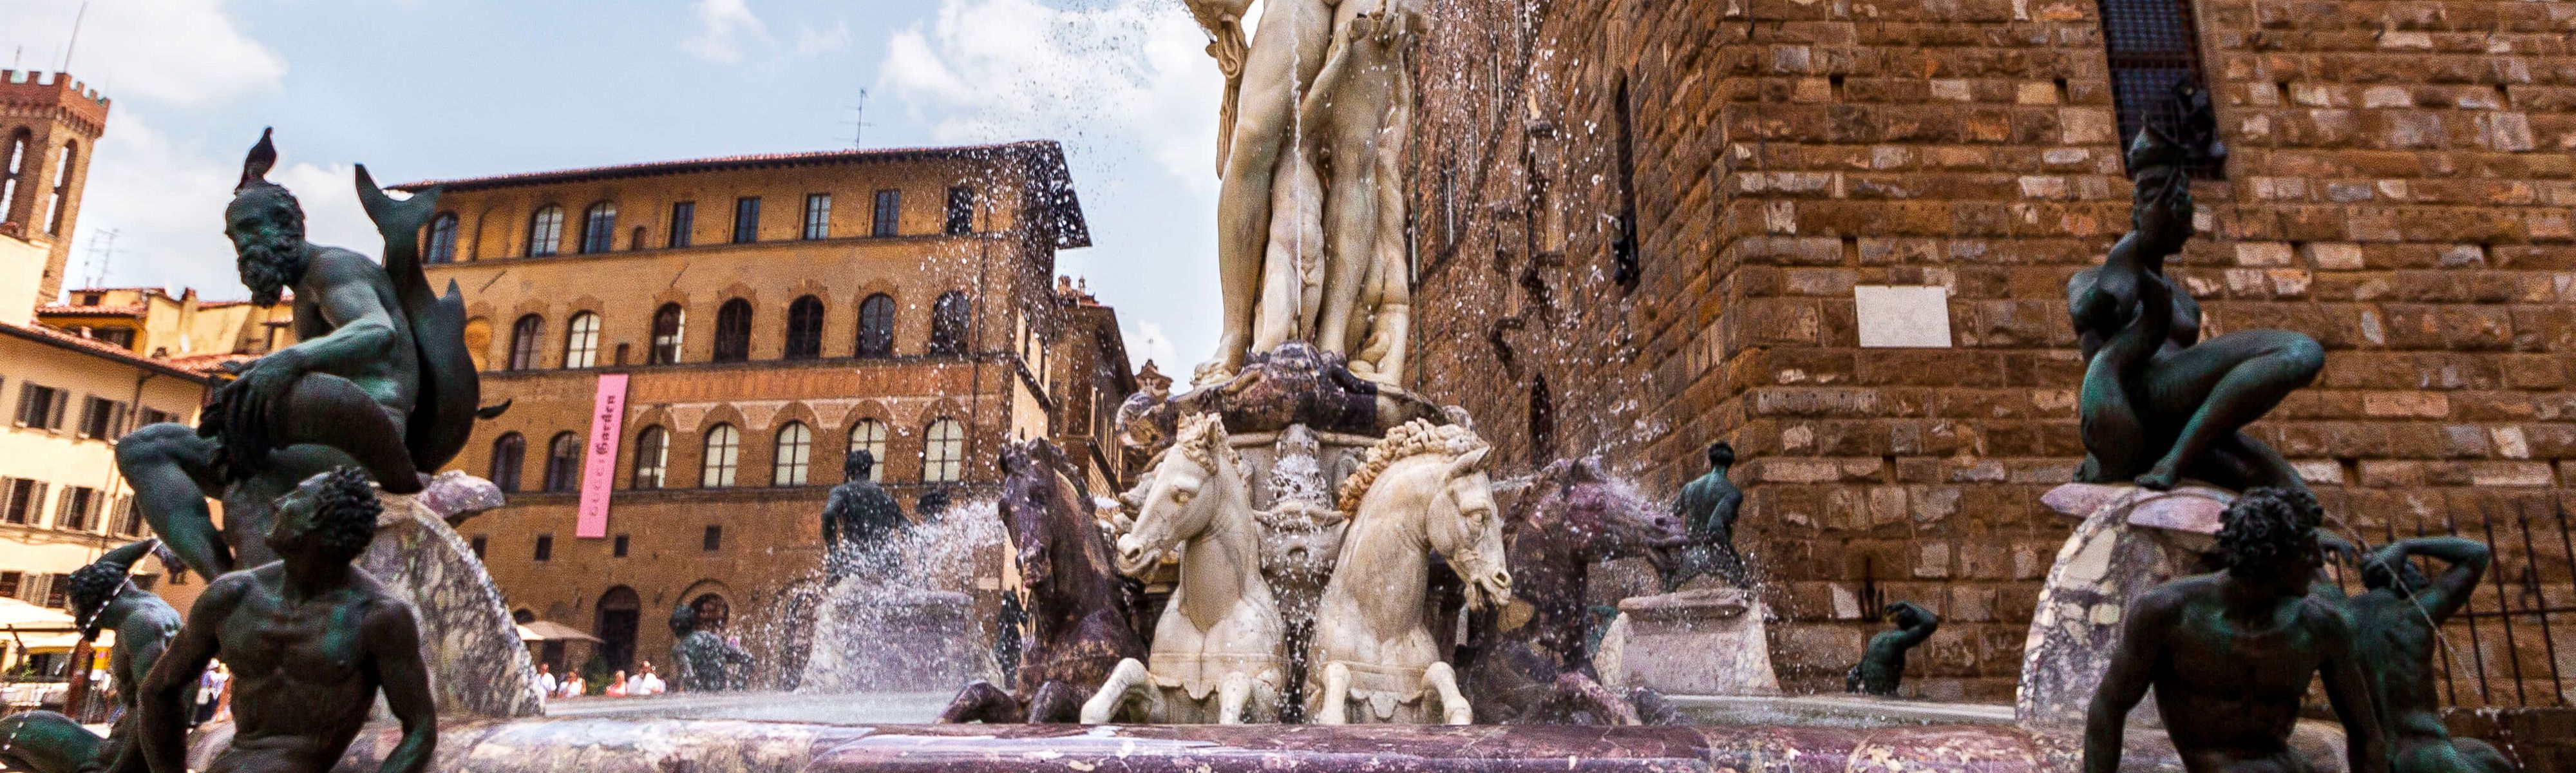 neptune fountain in florence italy